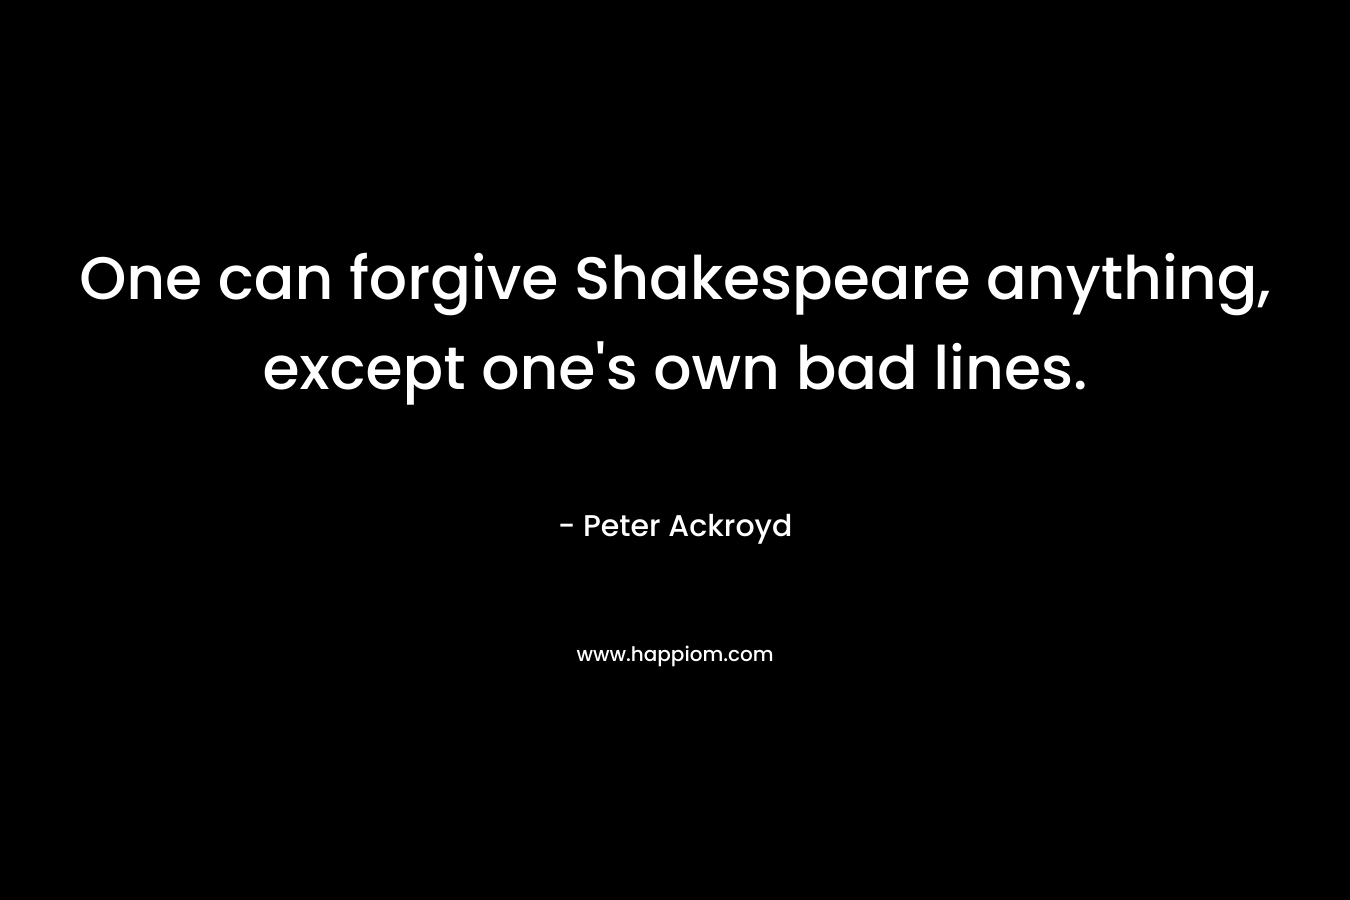 One can forgive Shakespeare anything, except one's own bad lines.